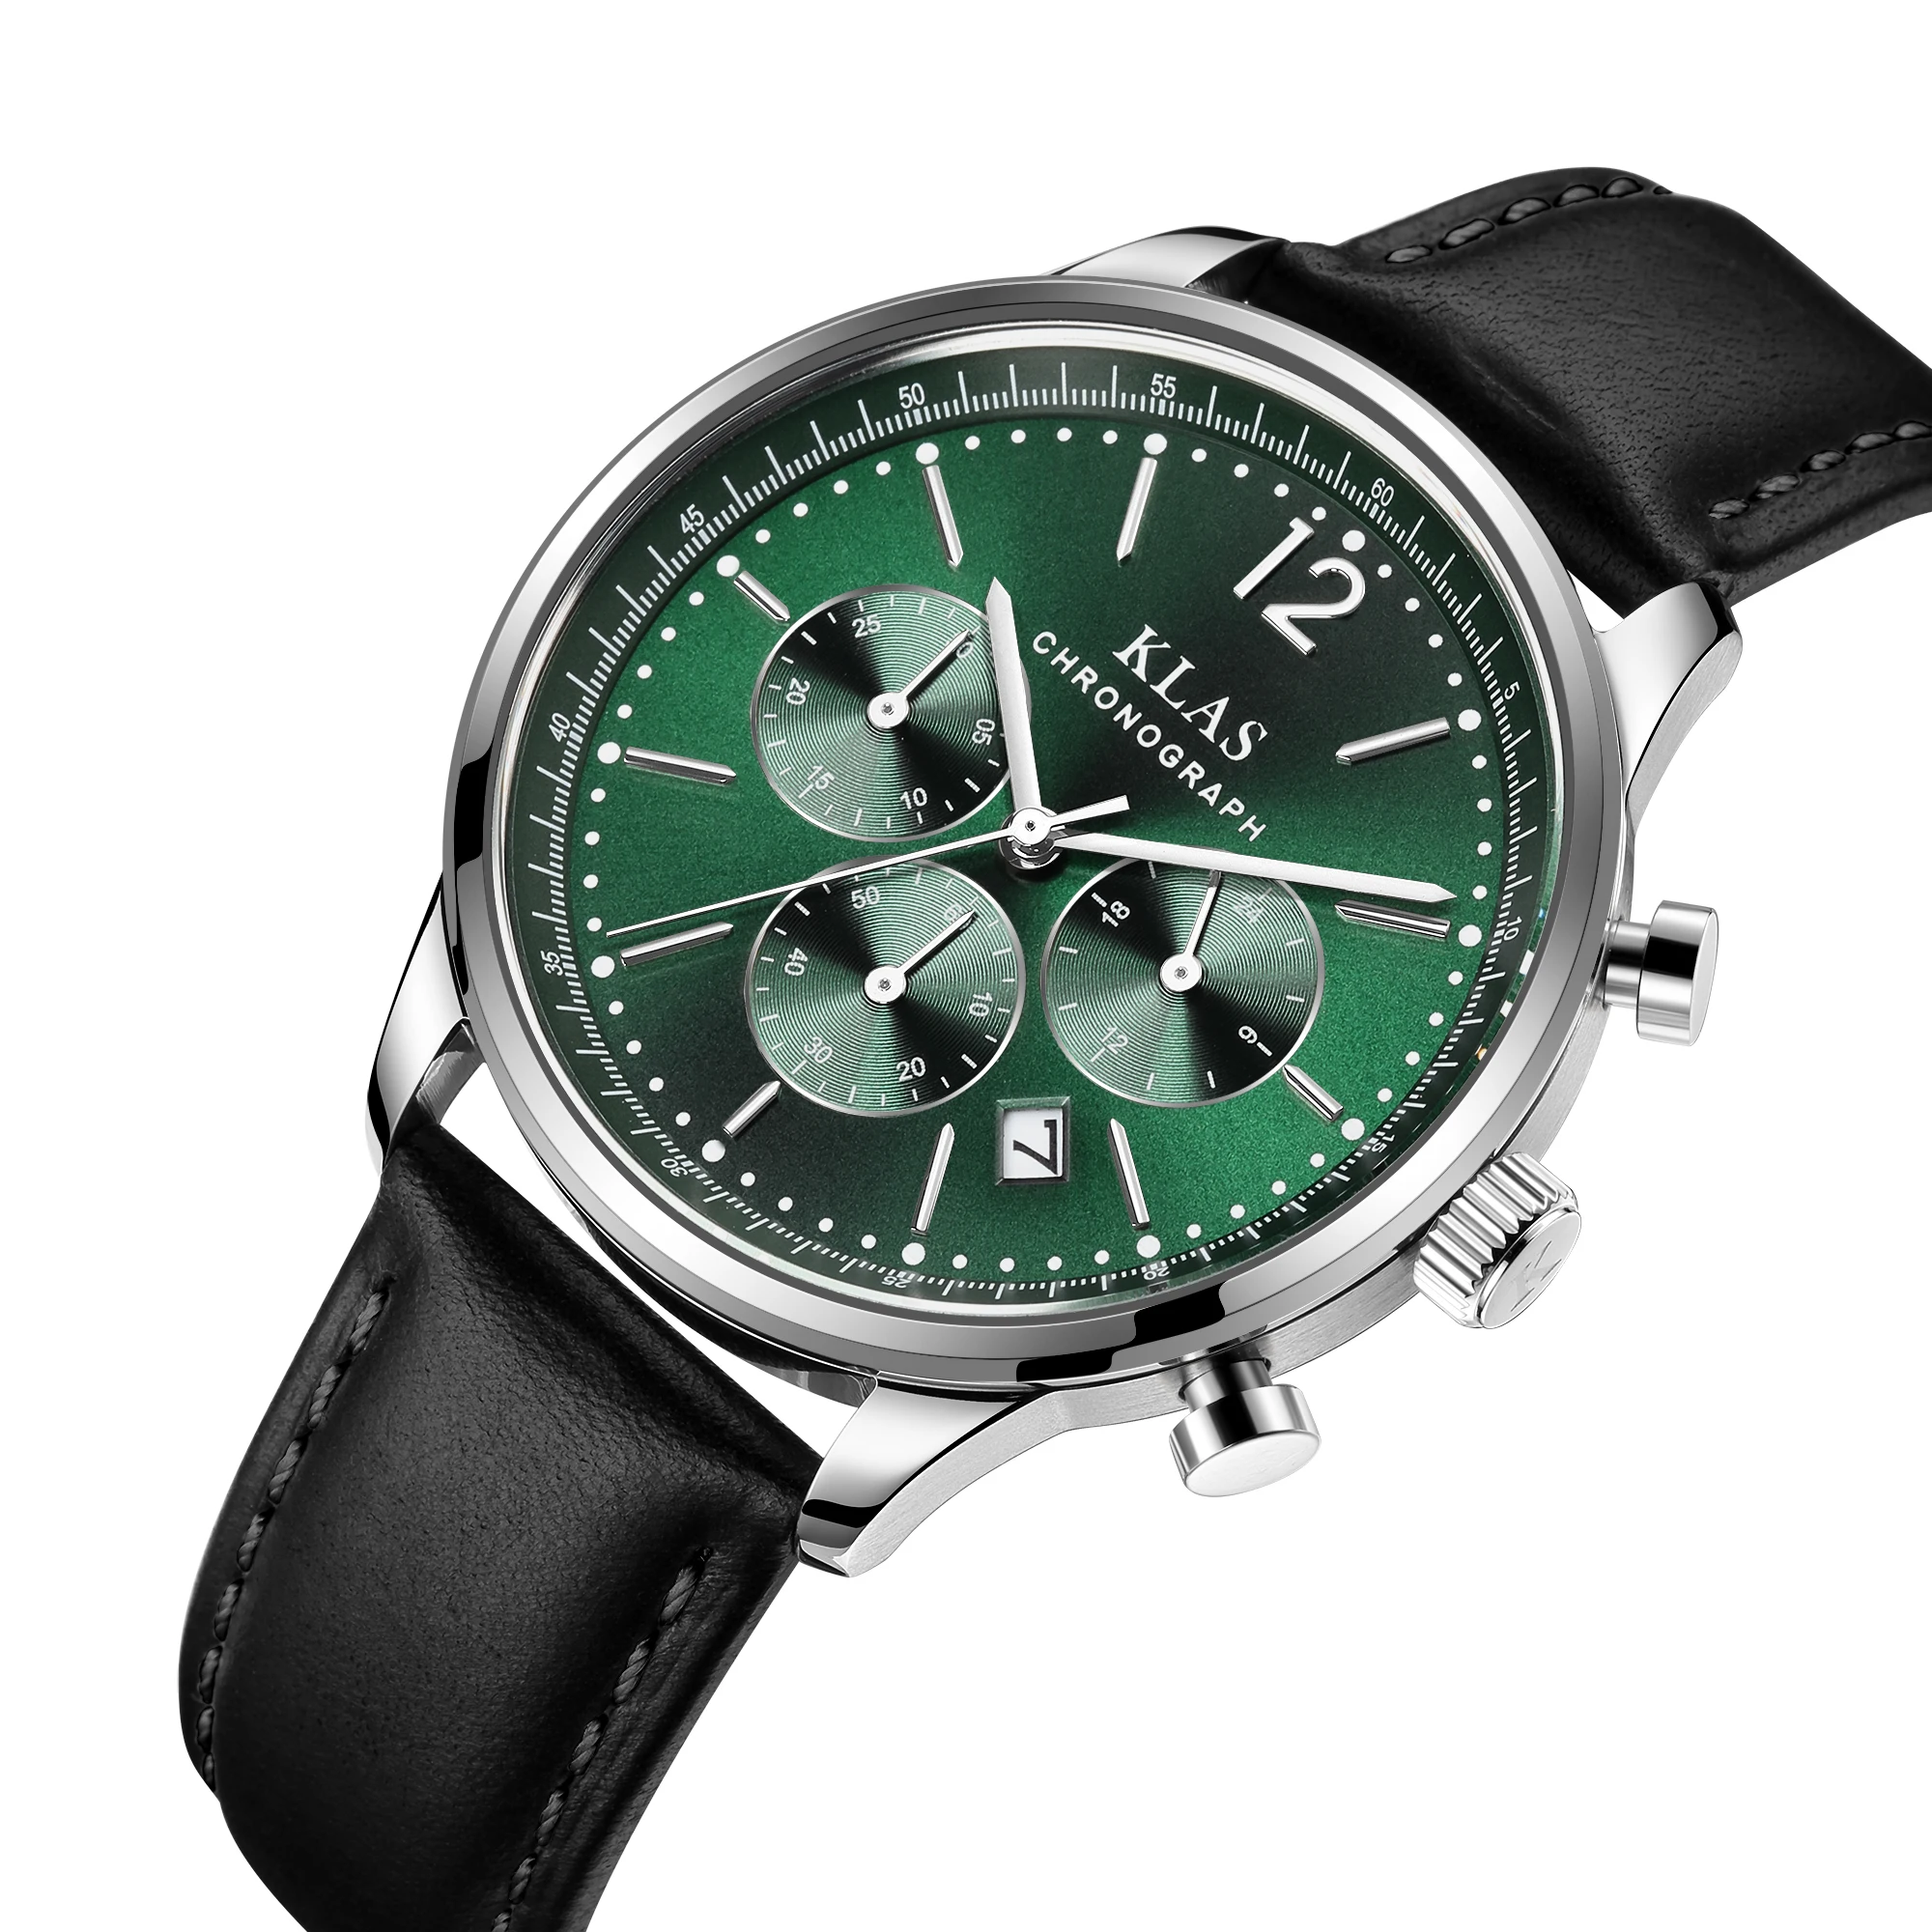 KLAS Popular Watch Strap Green Sunray Dial Quartz Movt Man Casual Watches Leather Band